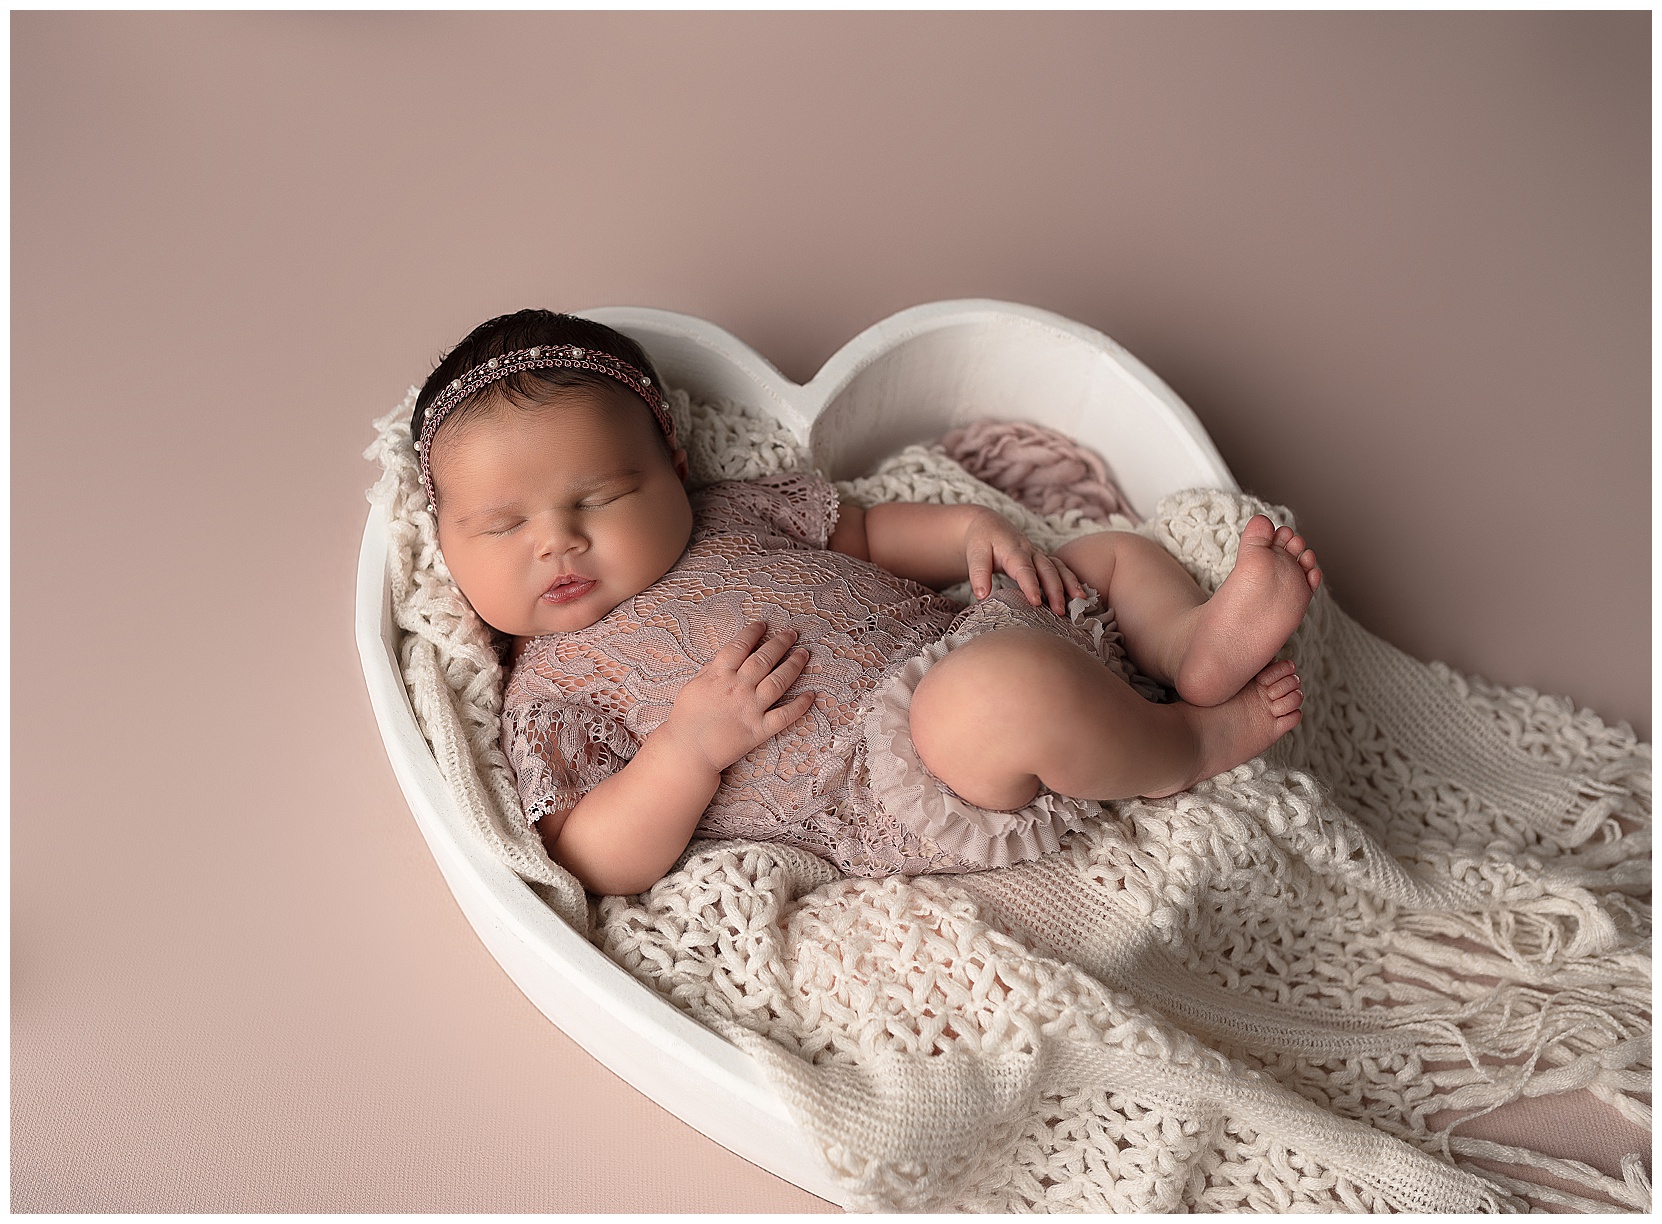 sleeping baby girl wearing a lace romper sleeping in a white heart shaped bowl